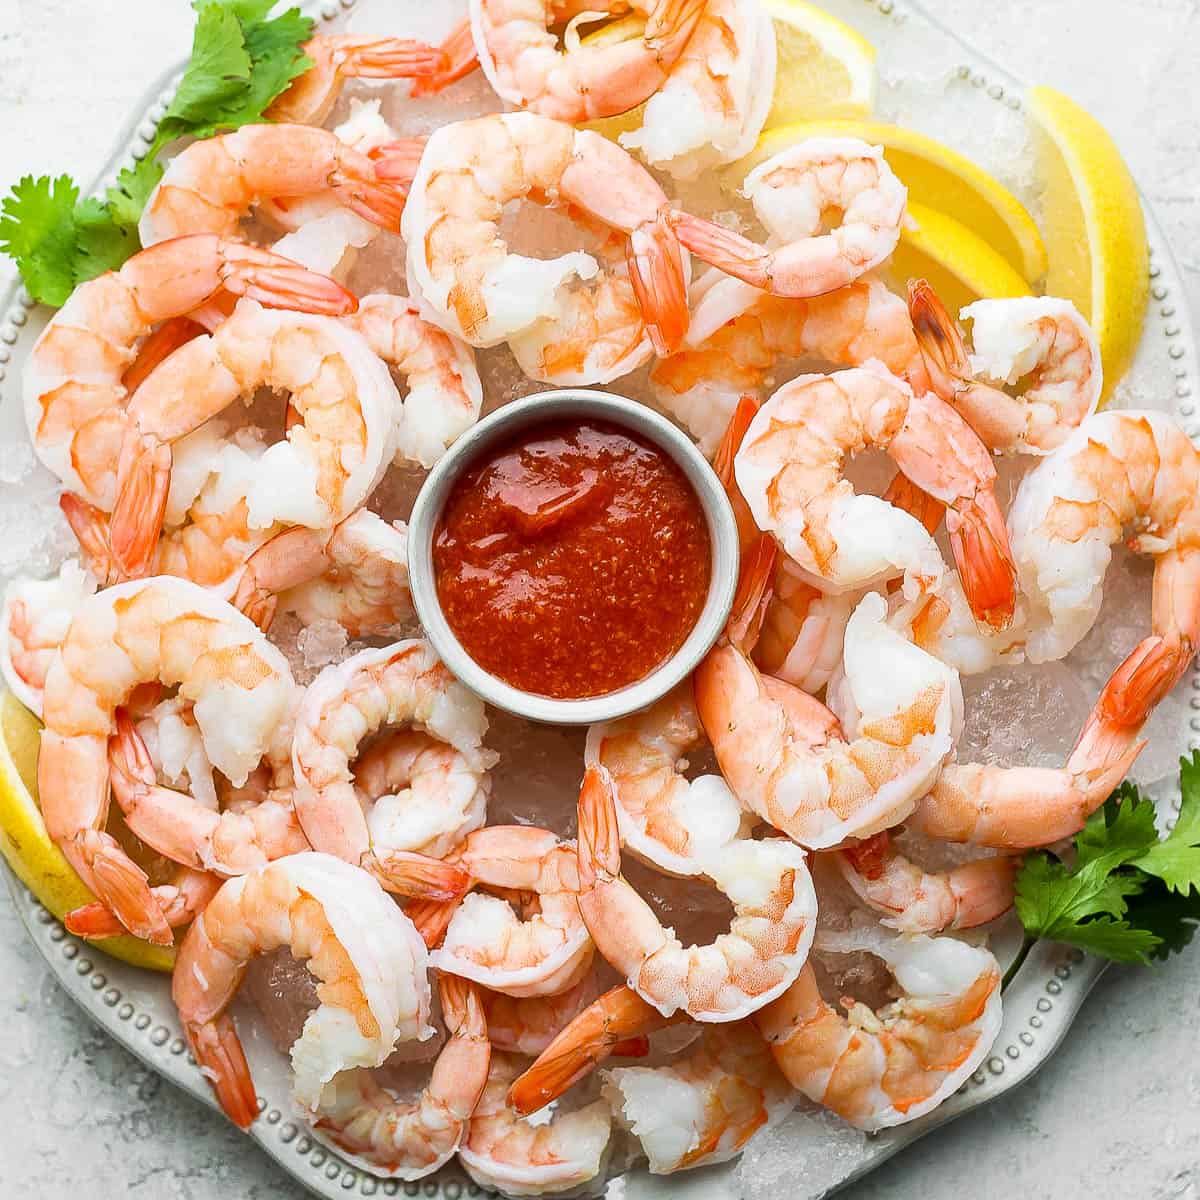 A plate of shrimp cocktail on ice with a bowl of cocktail sauce in the center.